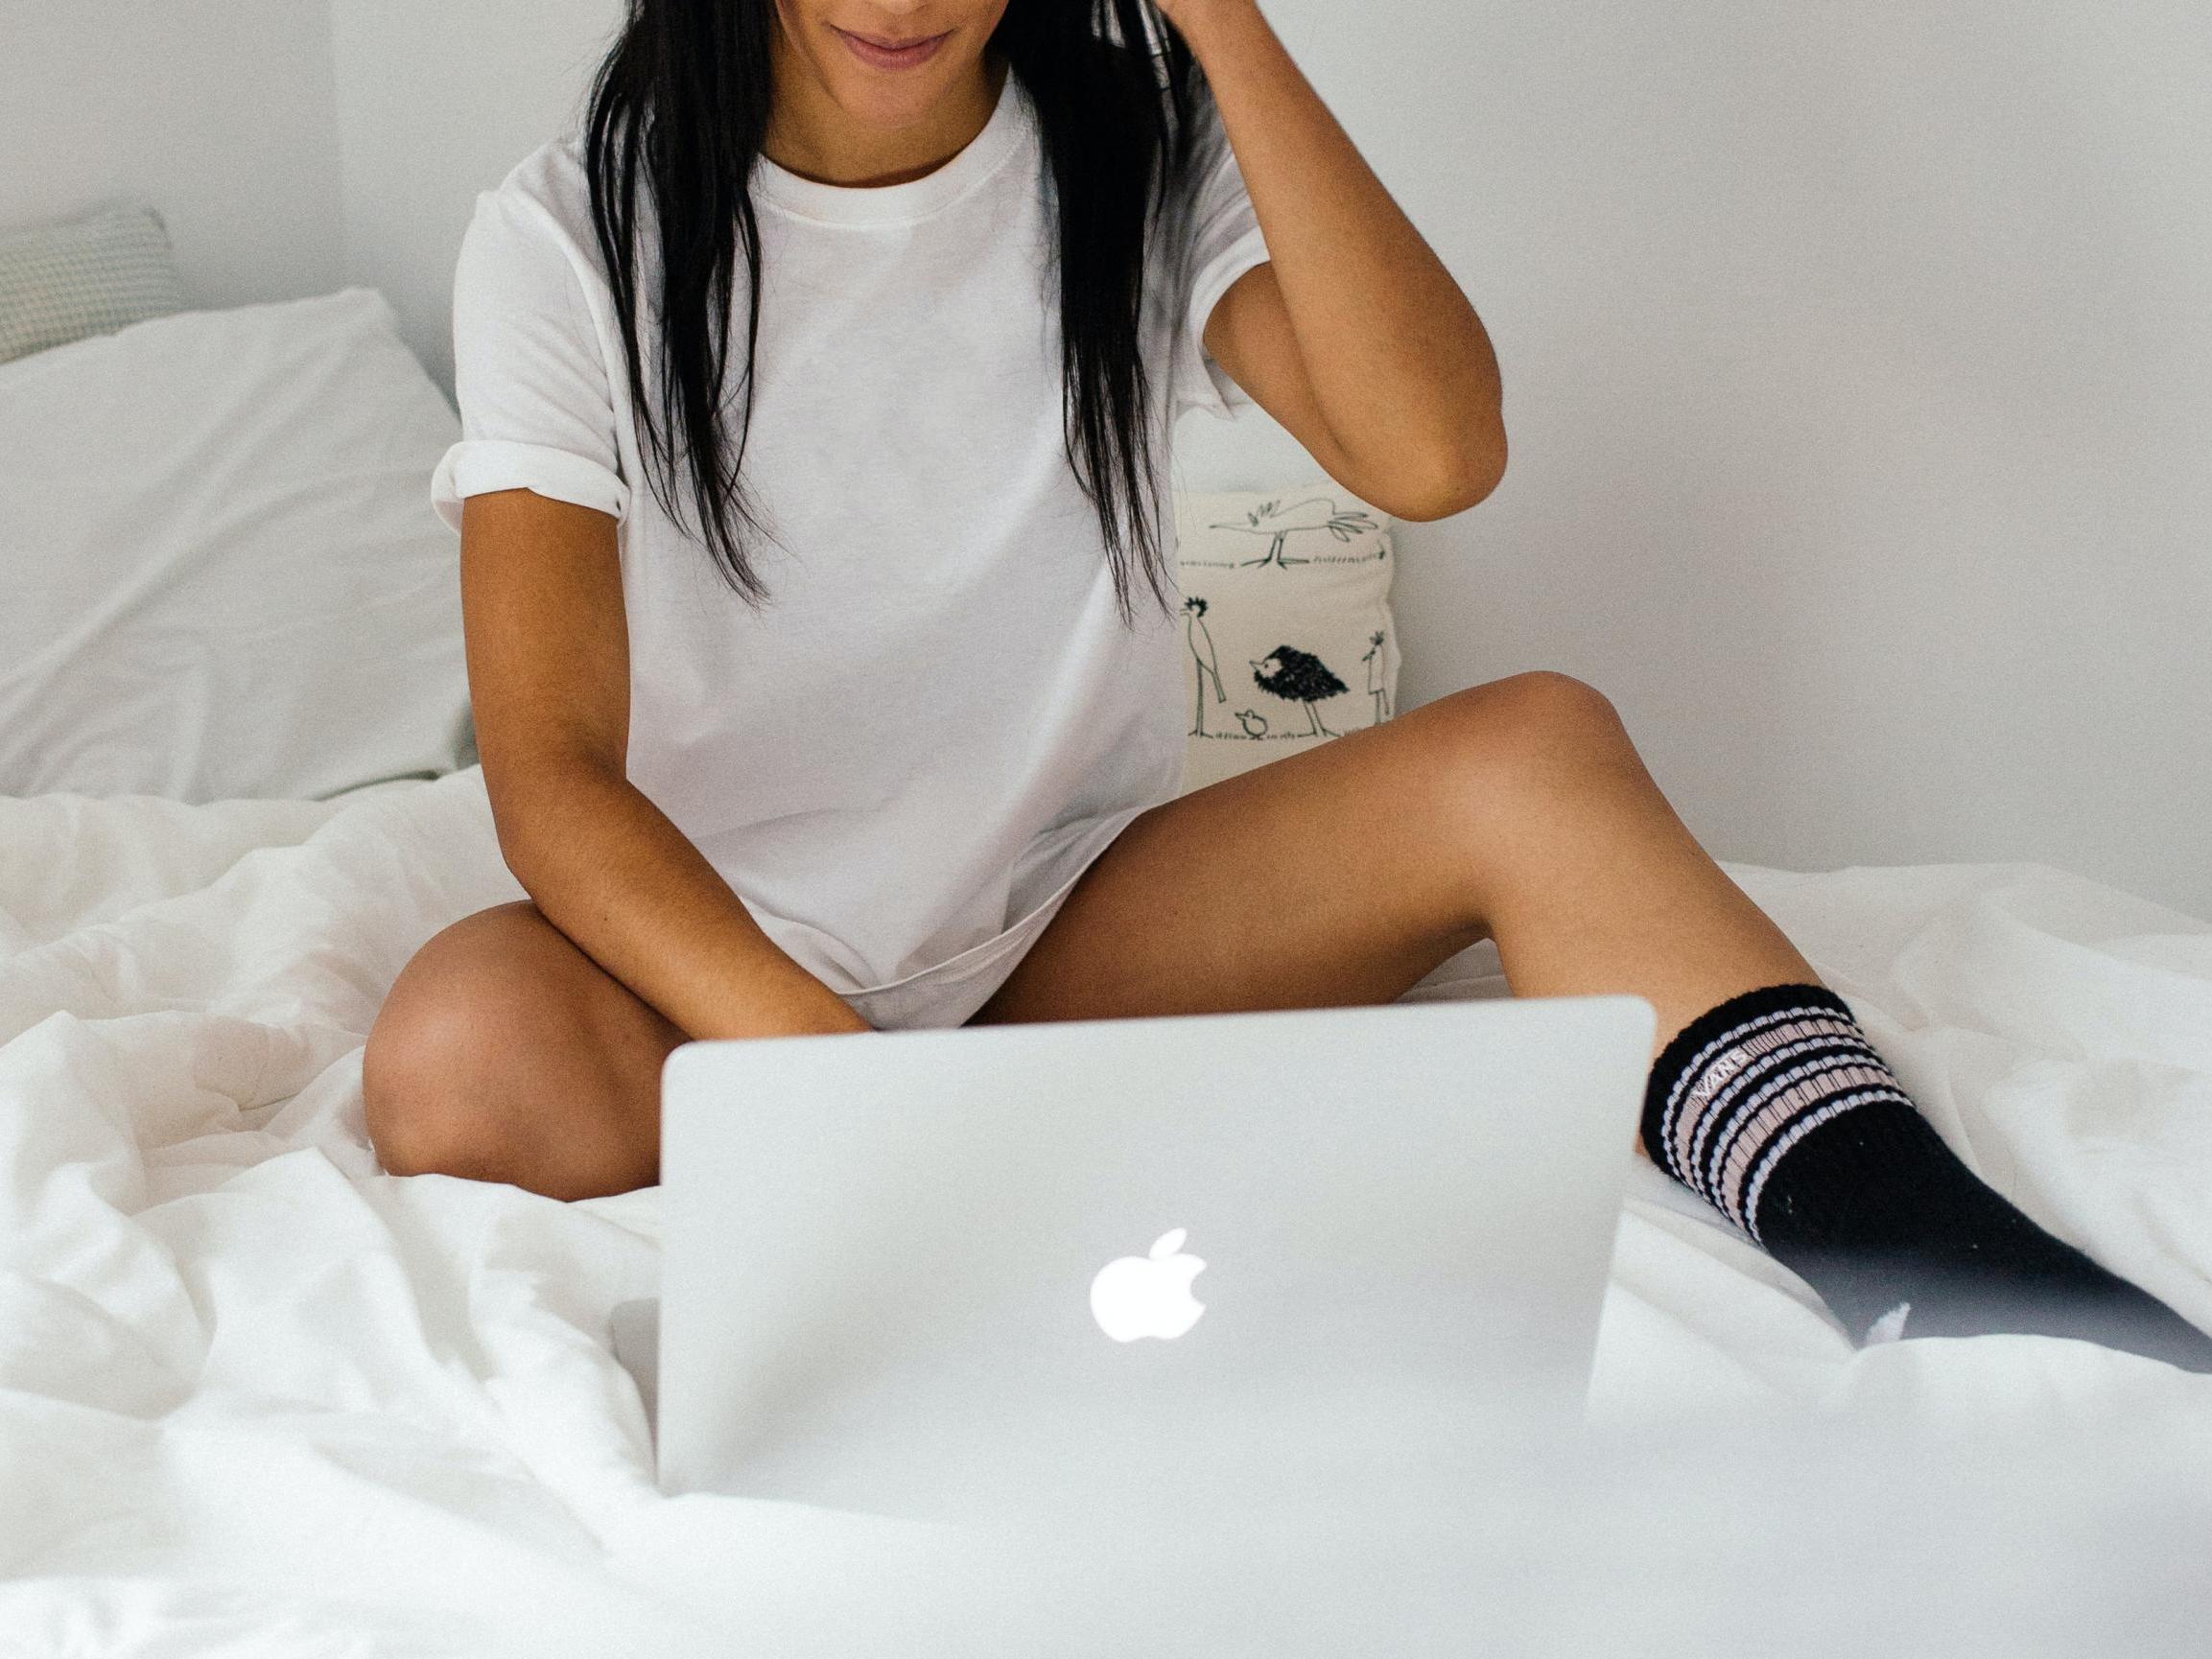 Descendencia Plasticidad Th I'm earning money to save for a house': Why so many young adults are  turning to the online sex industry | The Independent | The Independent